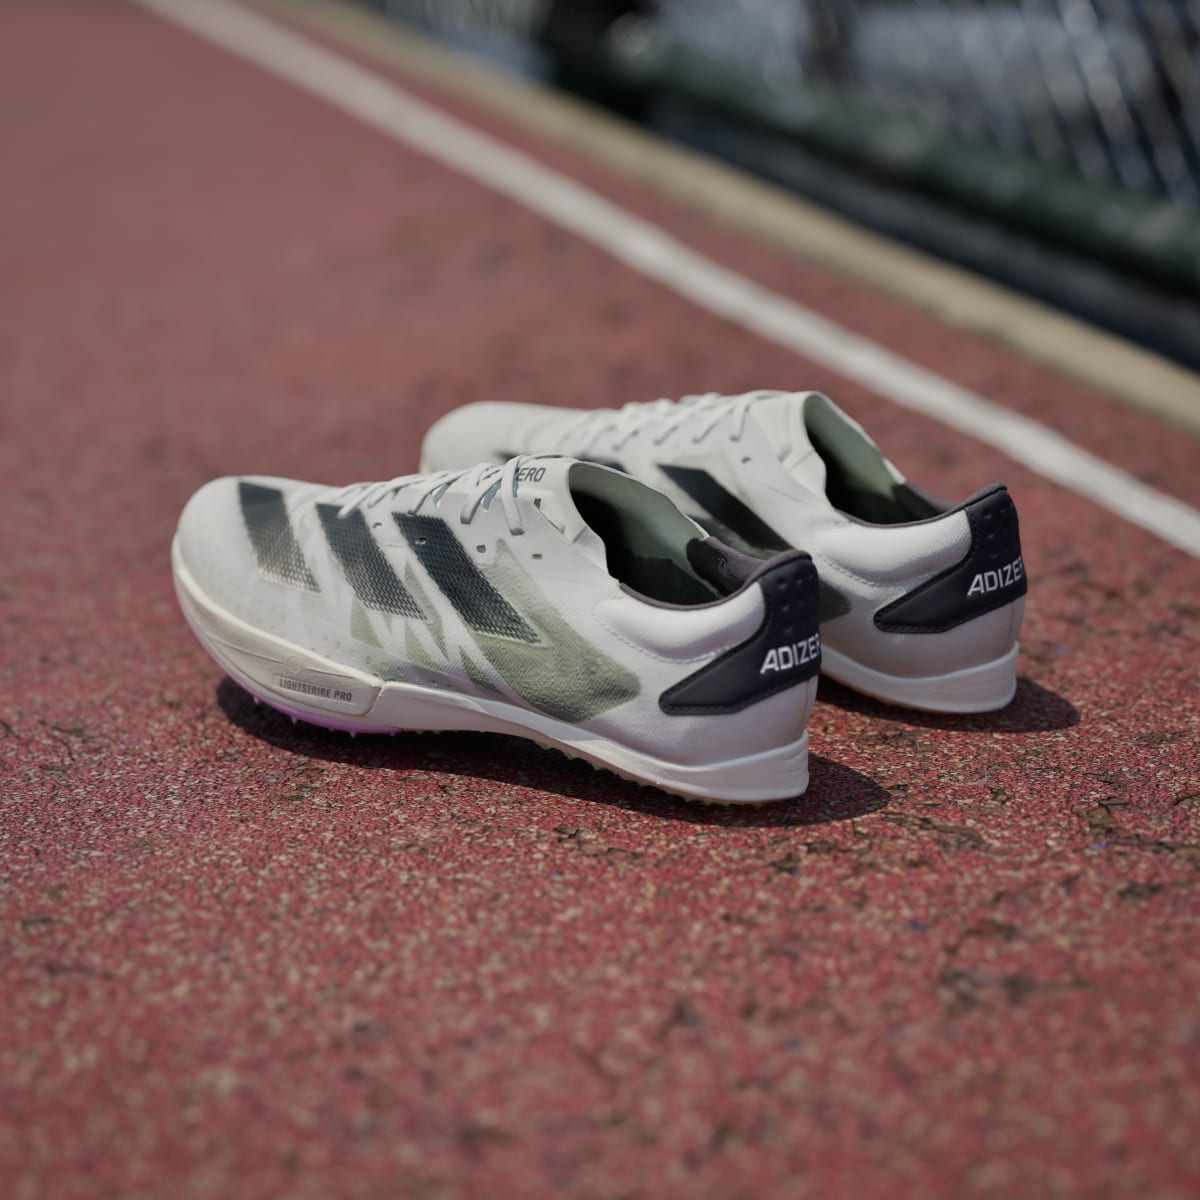 Adidas Adizero Ambition Track and Field Lightstrike Shoes. 5